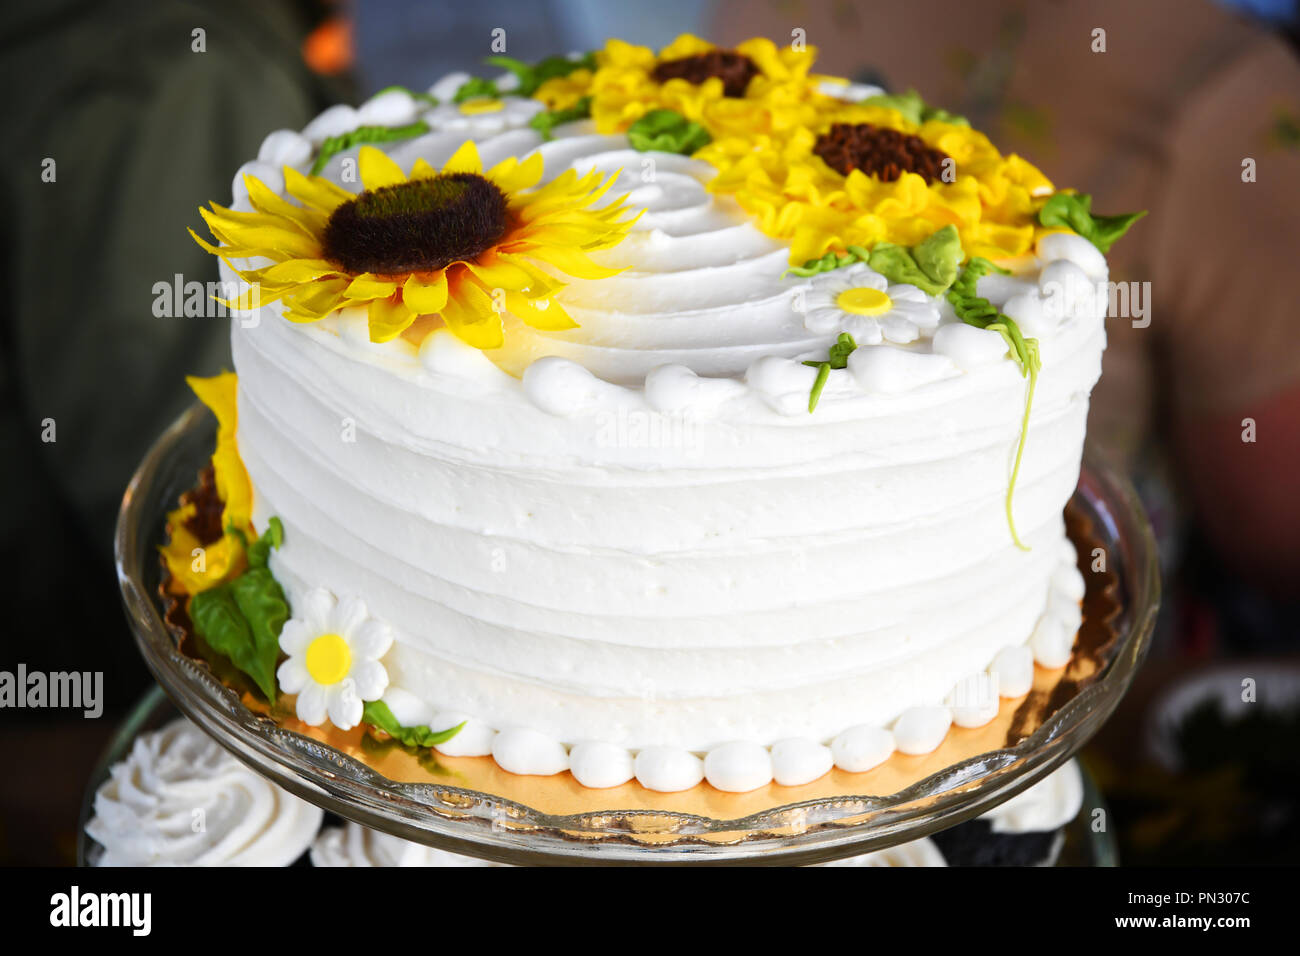 Wedding cake with white frosting and frosting sunflowers Stock Photo